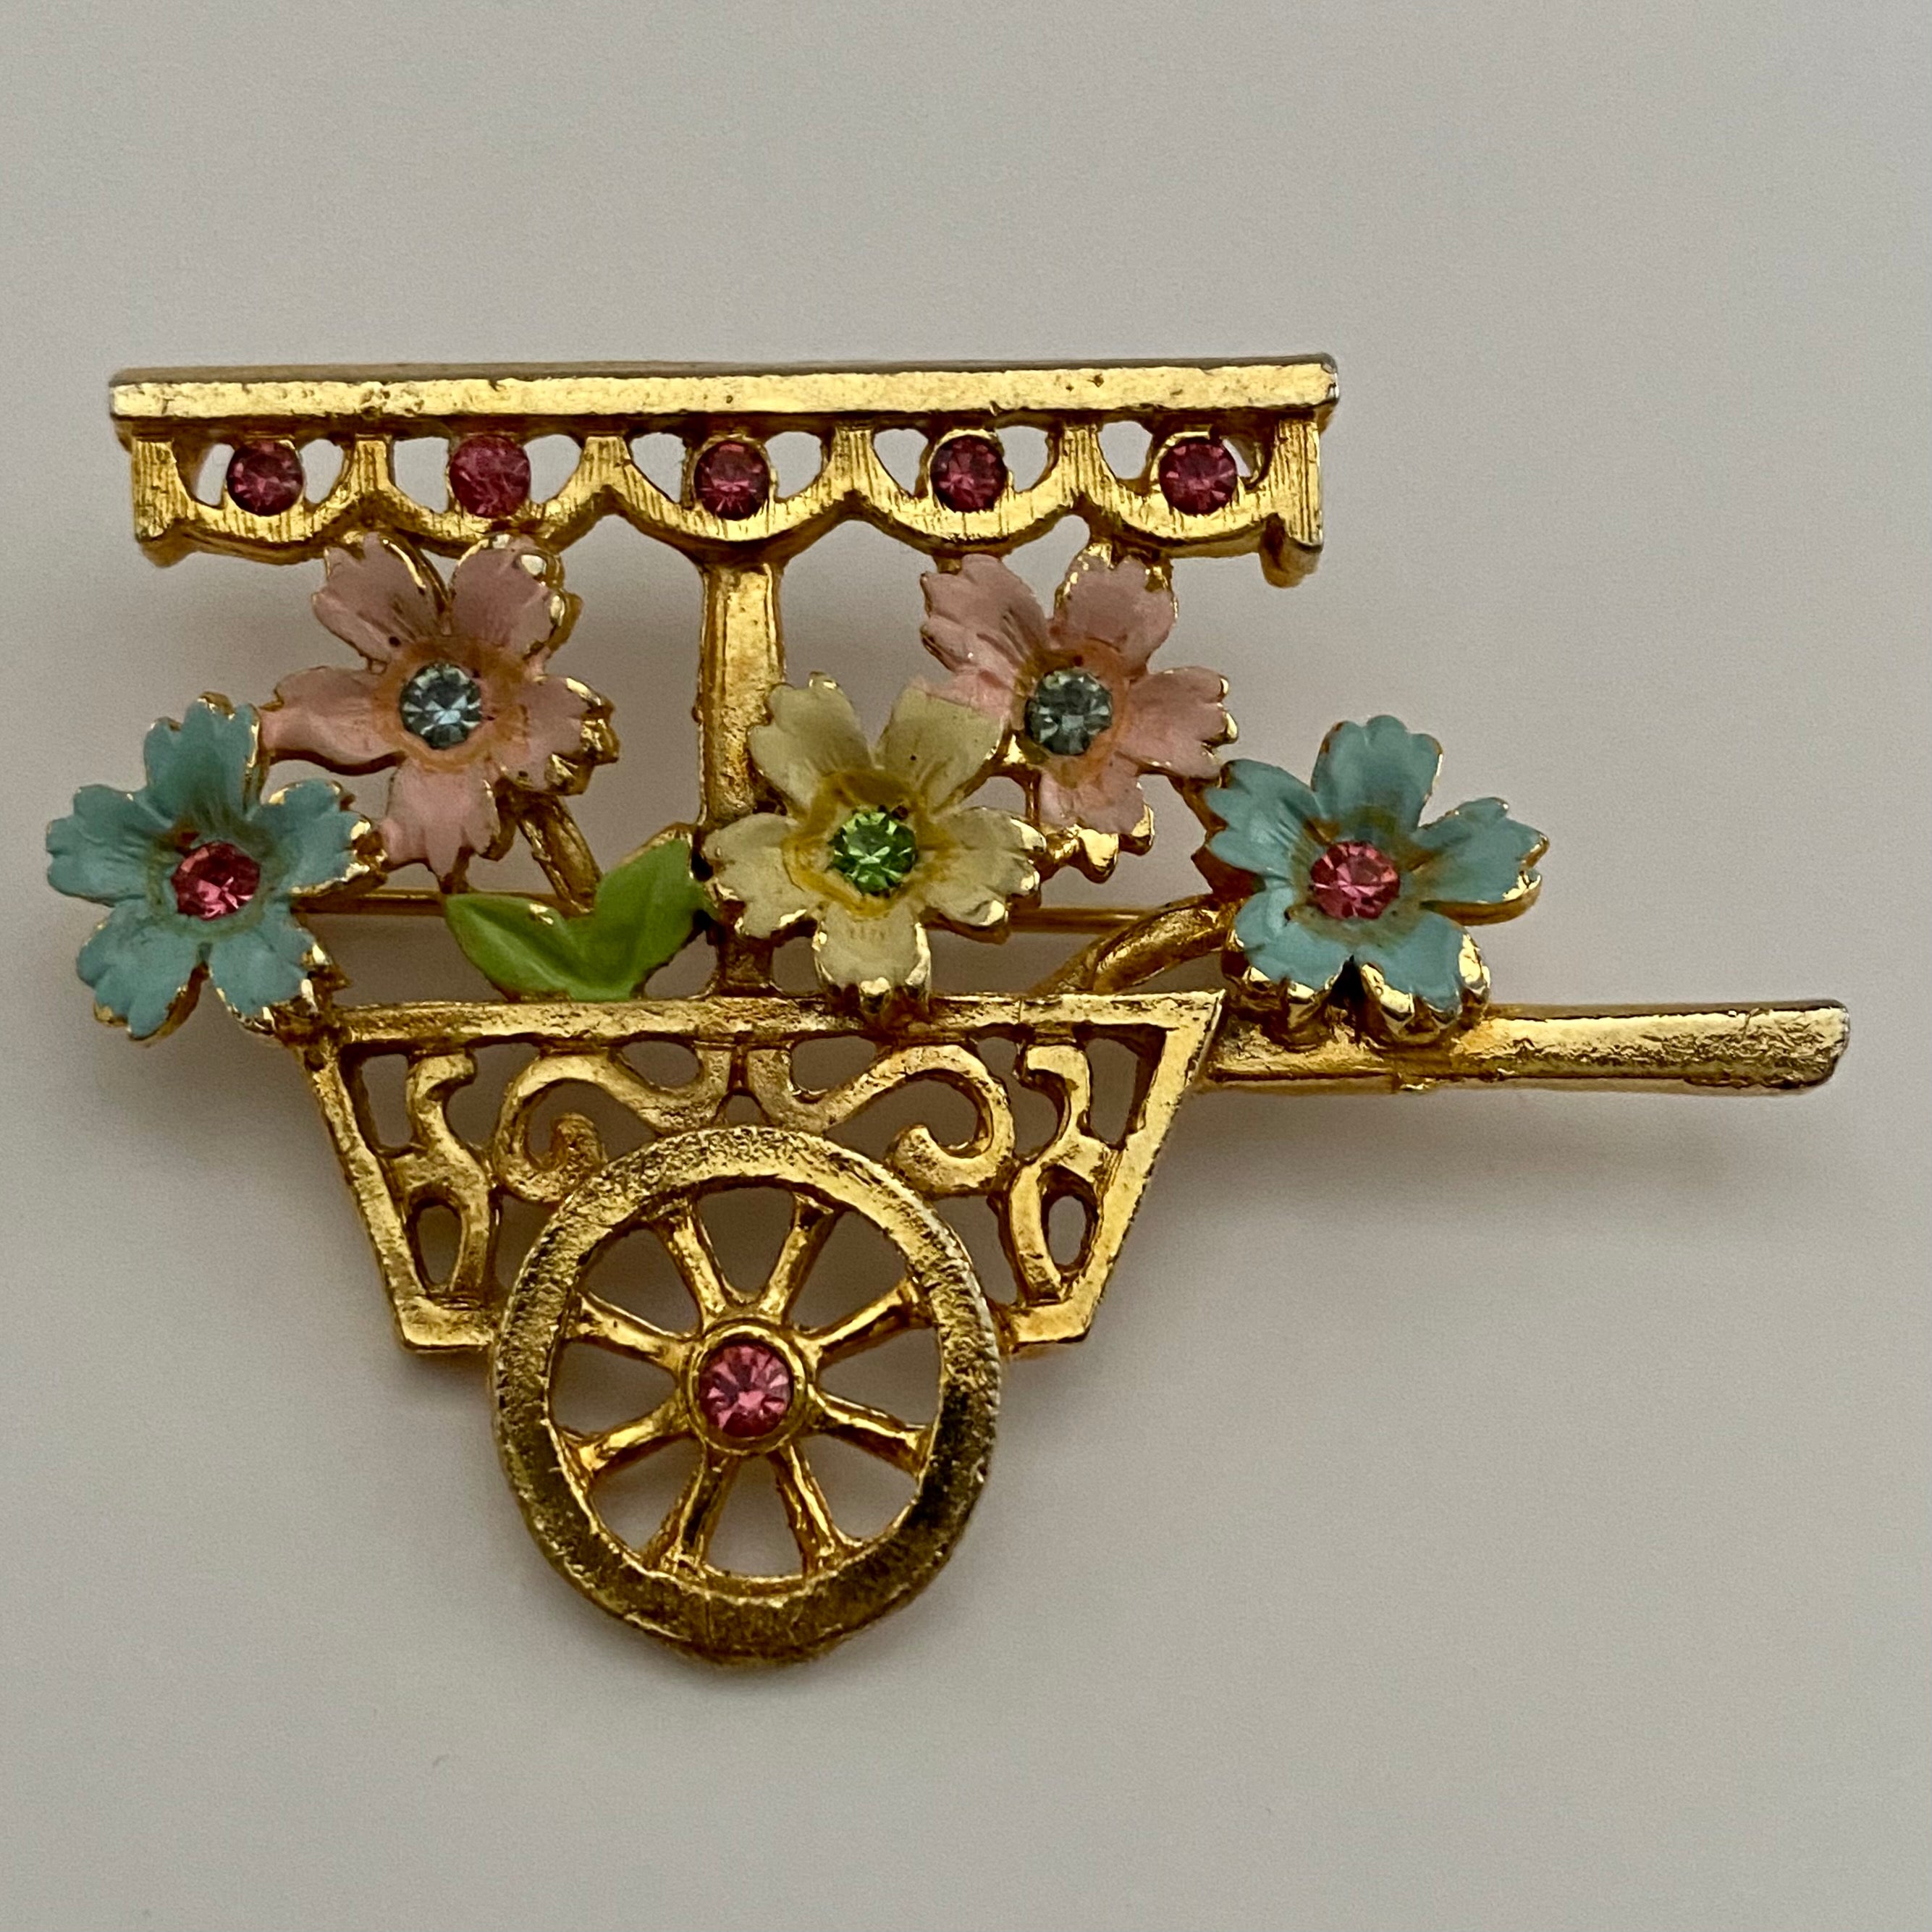 Pin on Flowers Carts